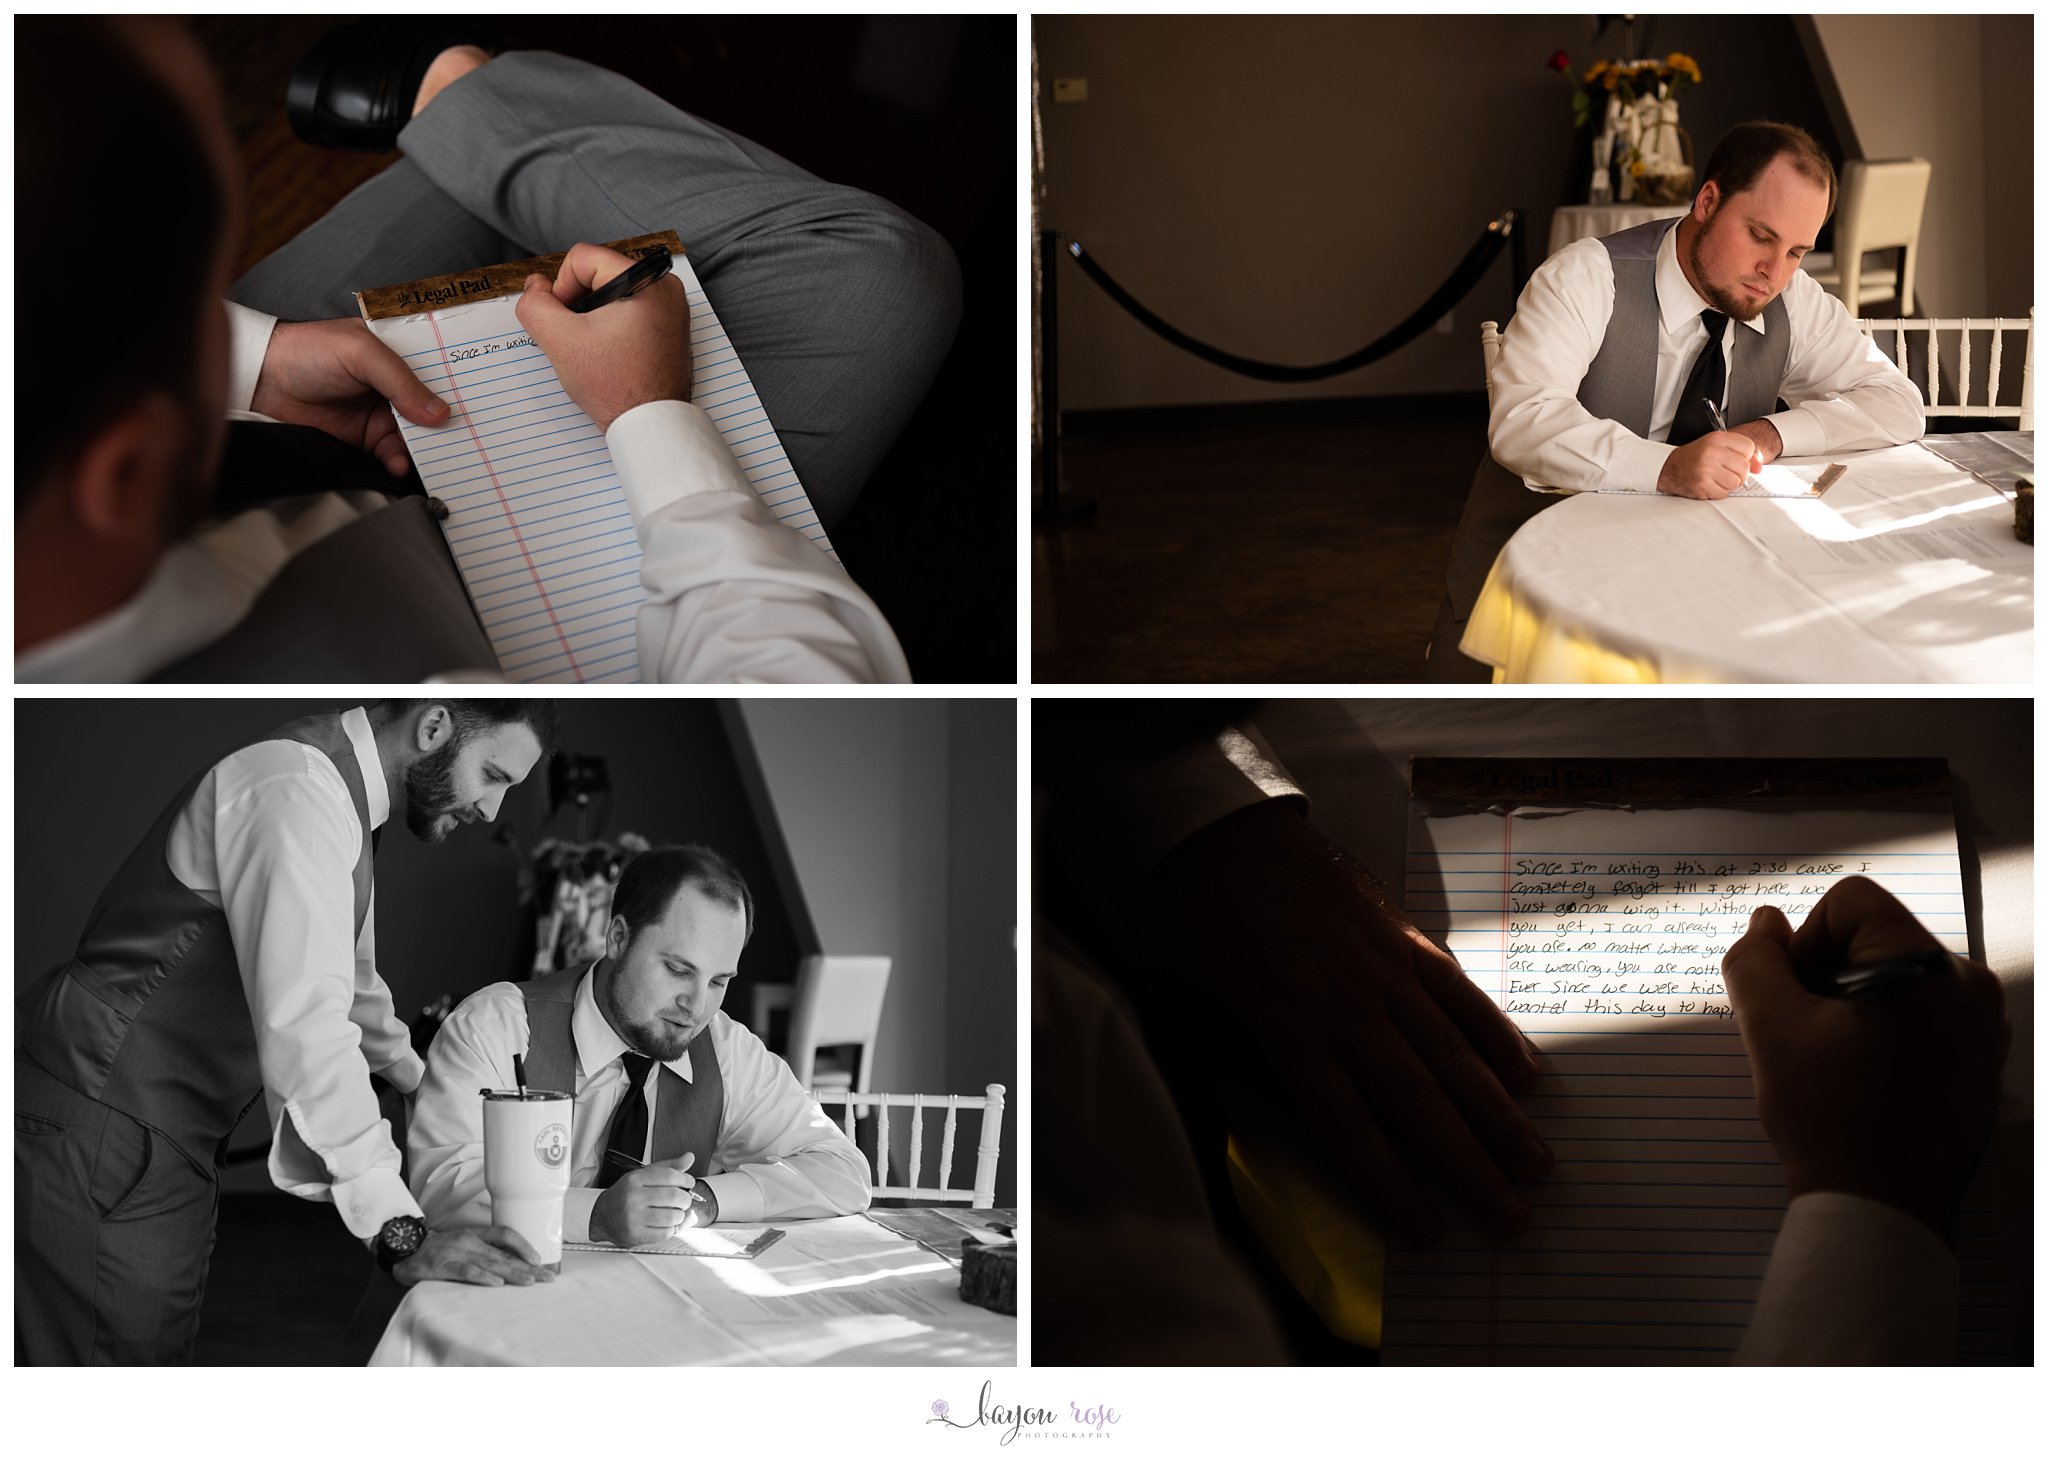 groom writing letter on wedding day